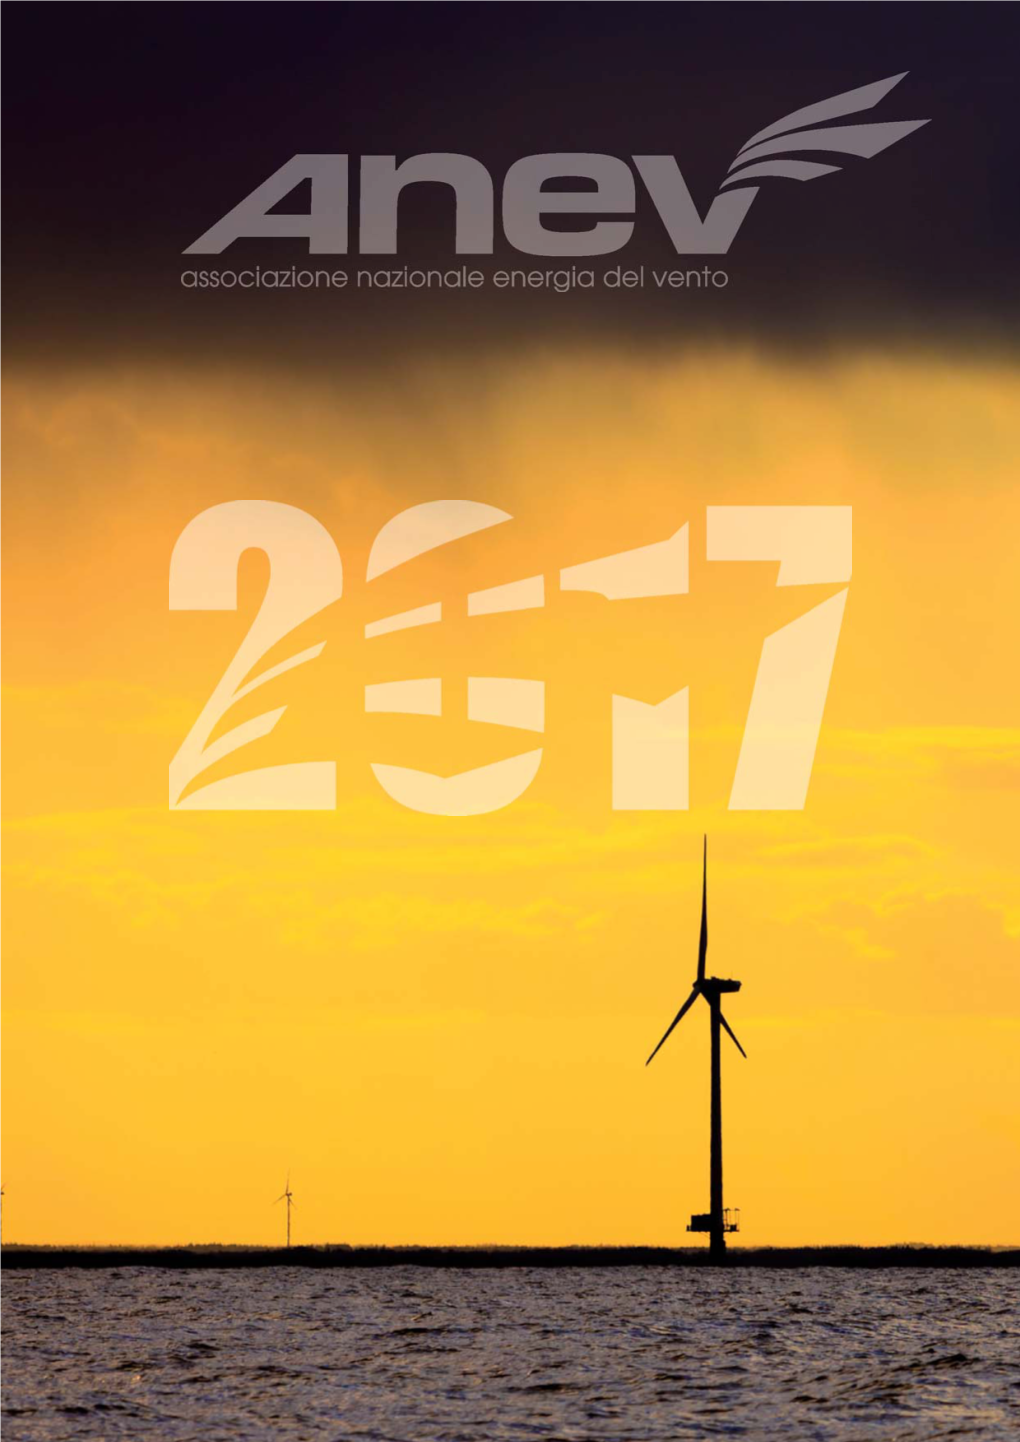 Anev – National Wind Energy Association